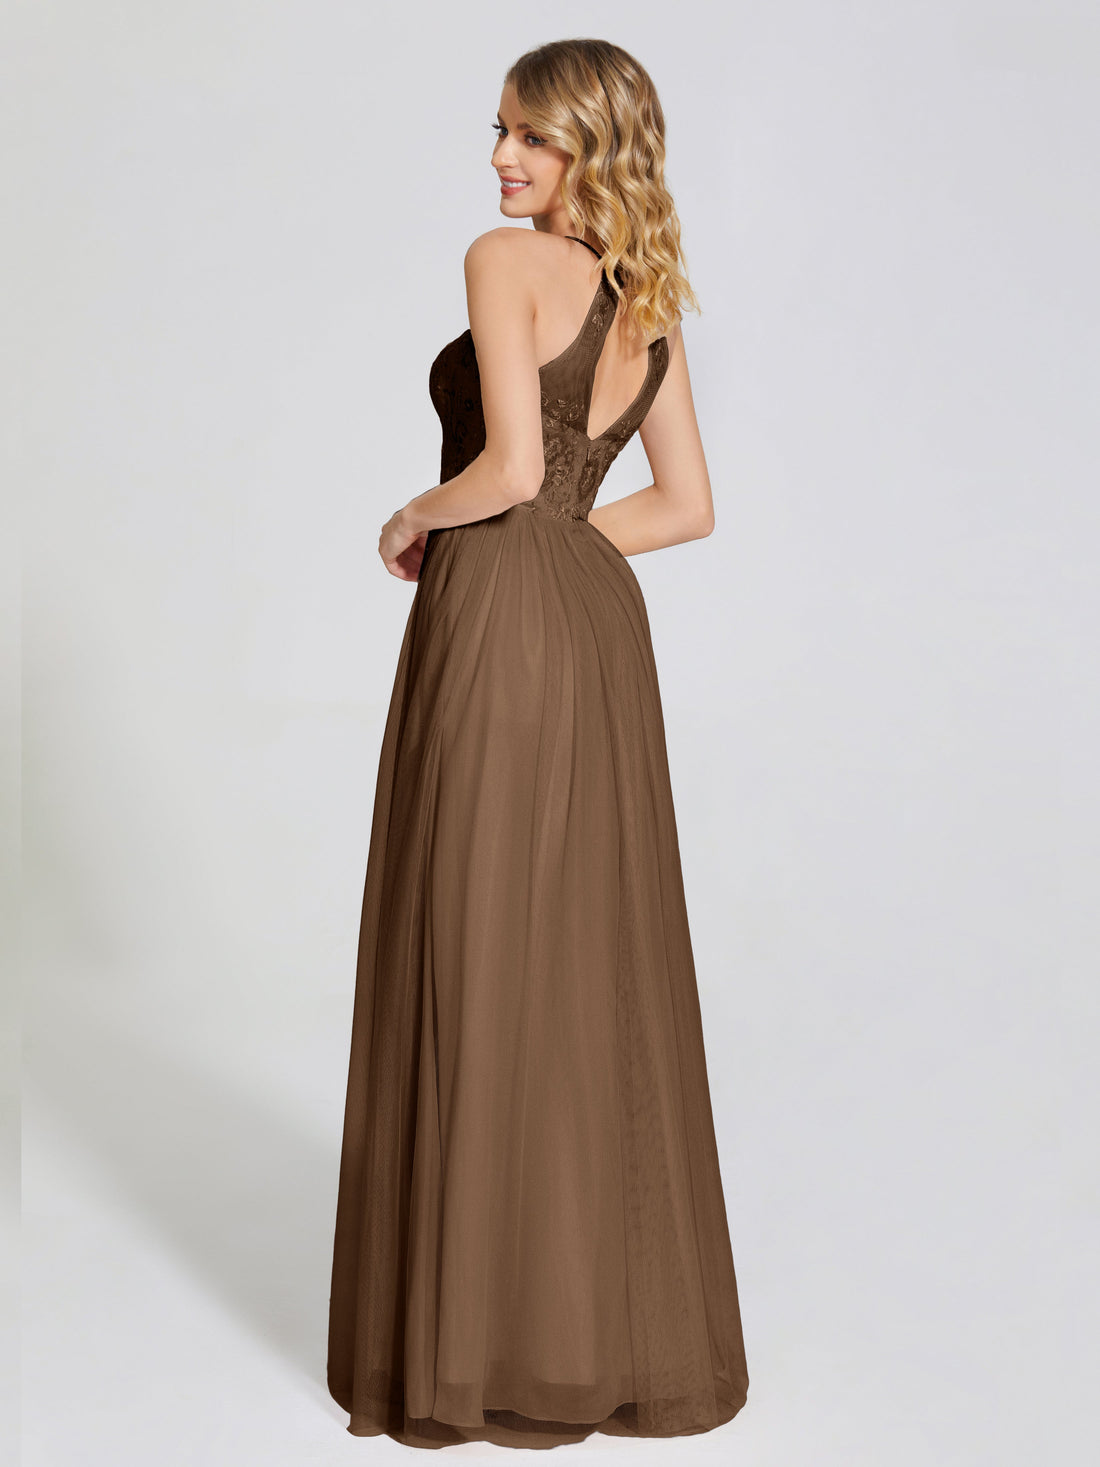 Destiny Halter Embroidered Tulle Bridesmaid Dresses